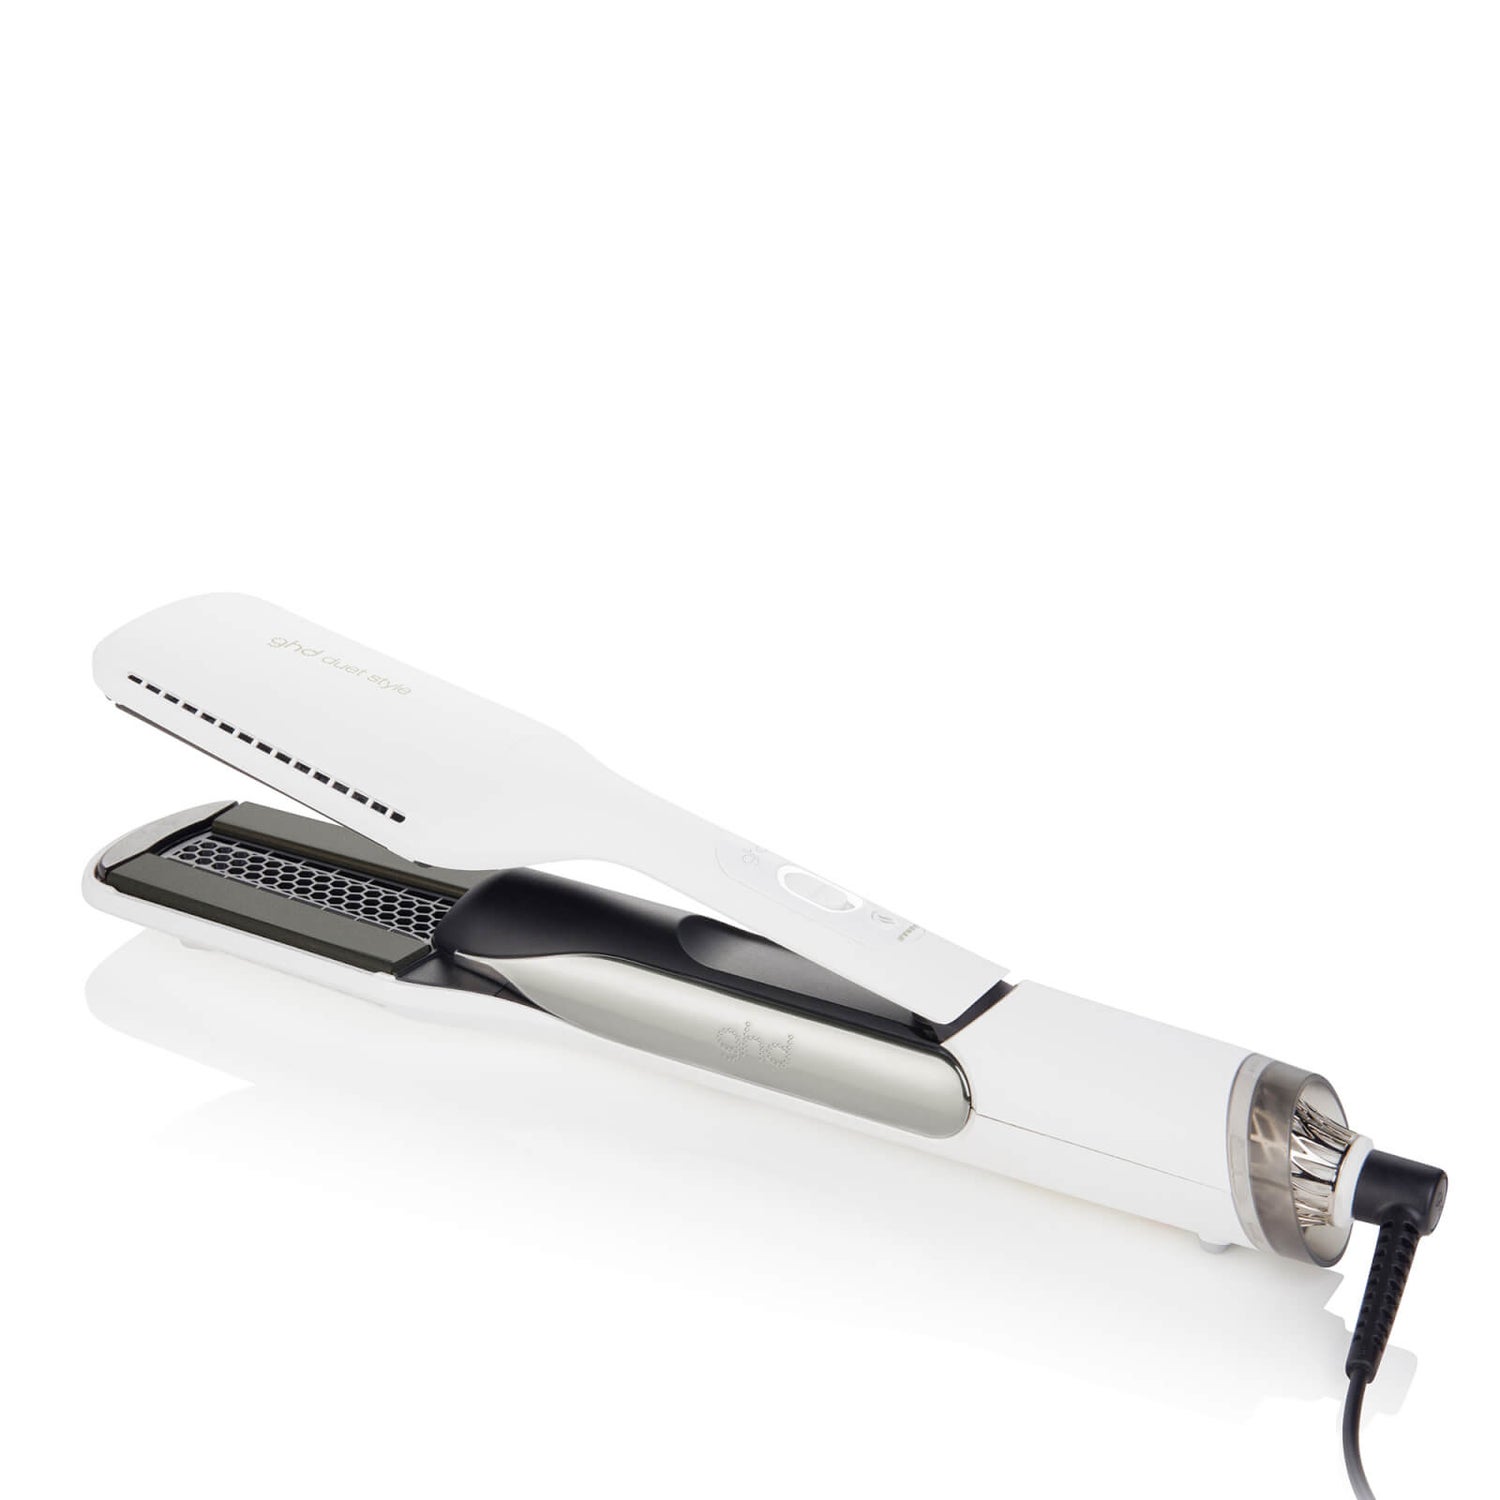 ghd Duet Style 2-in-1 Hot Air Styler - White